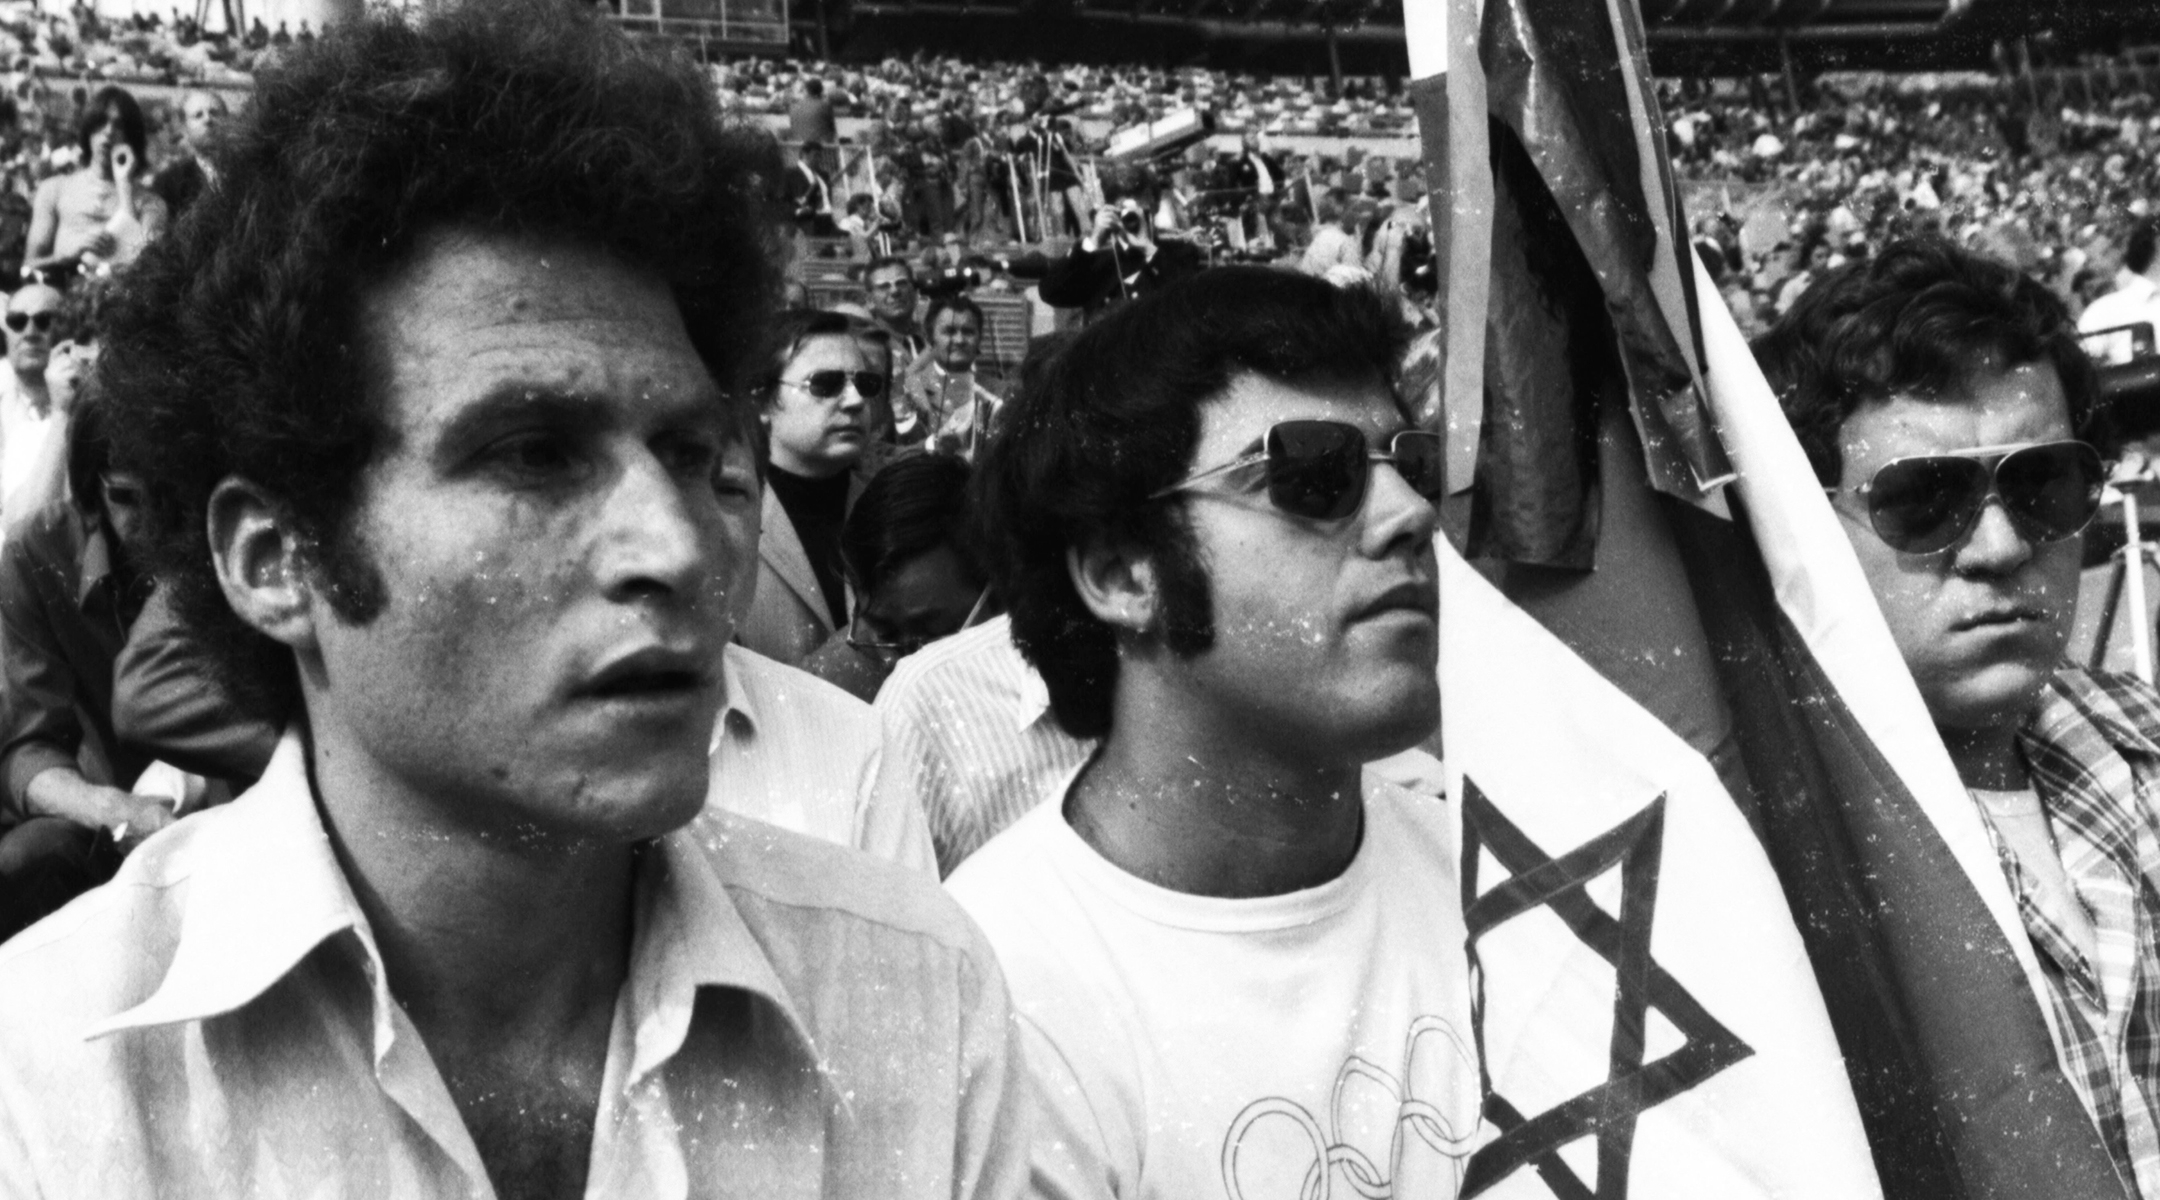 Israeli fans at the infamous 1972 Olympics in Munich, Sept. 5, 1972. (Klaus Rose/picture alliance via Getty Images)